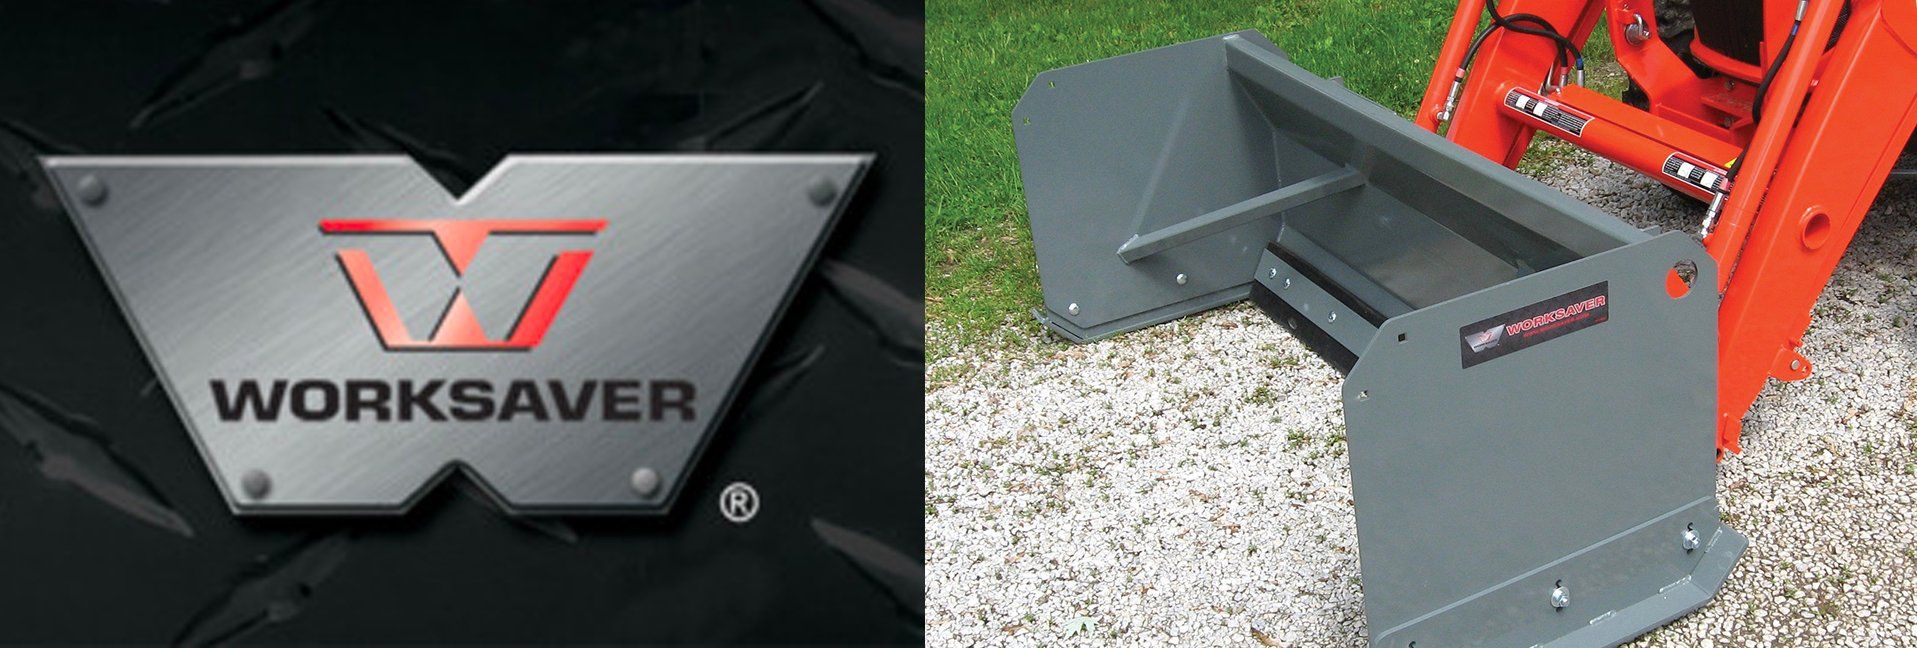 Worksaver’s 24-Series snow pusher